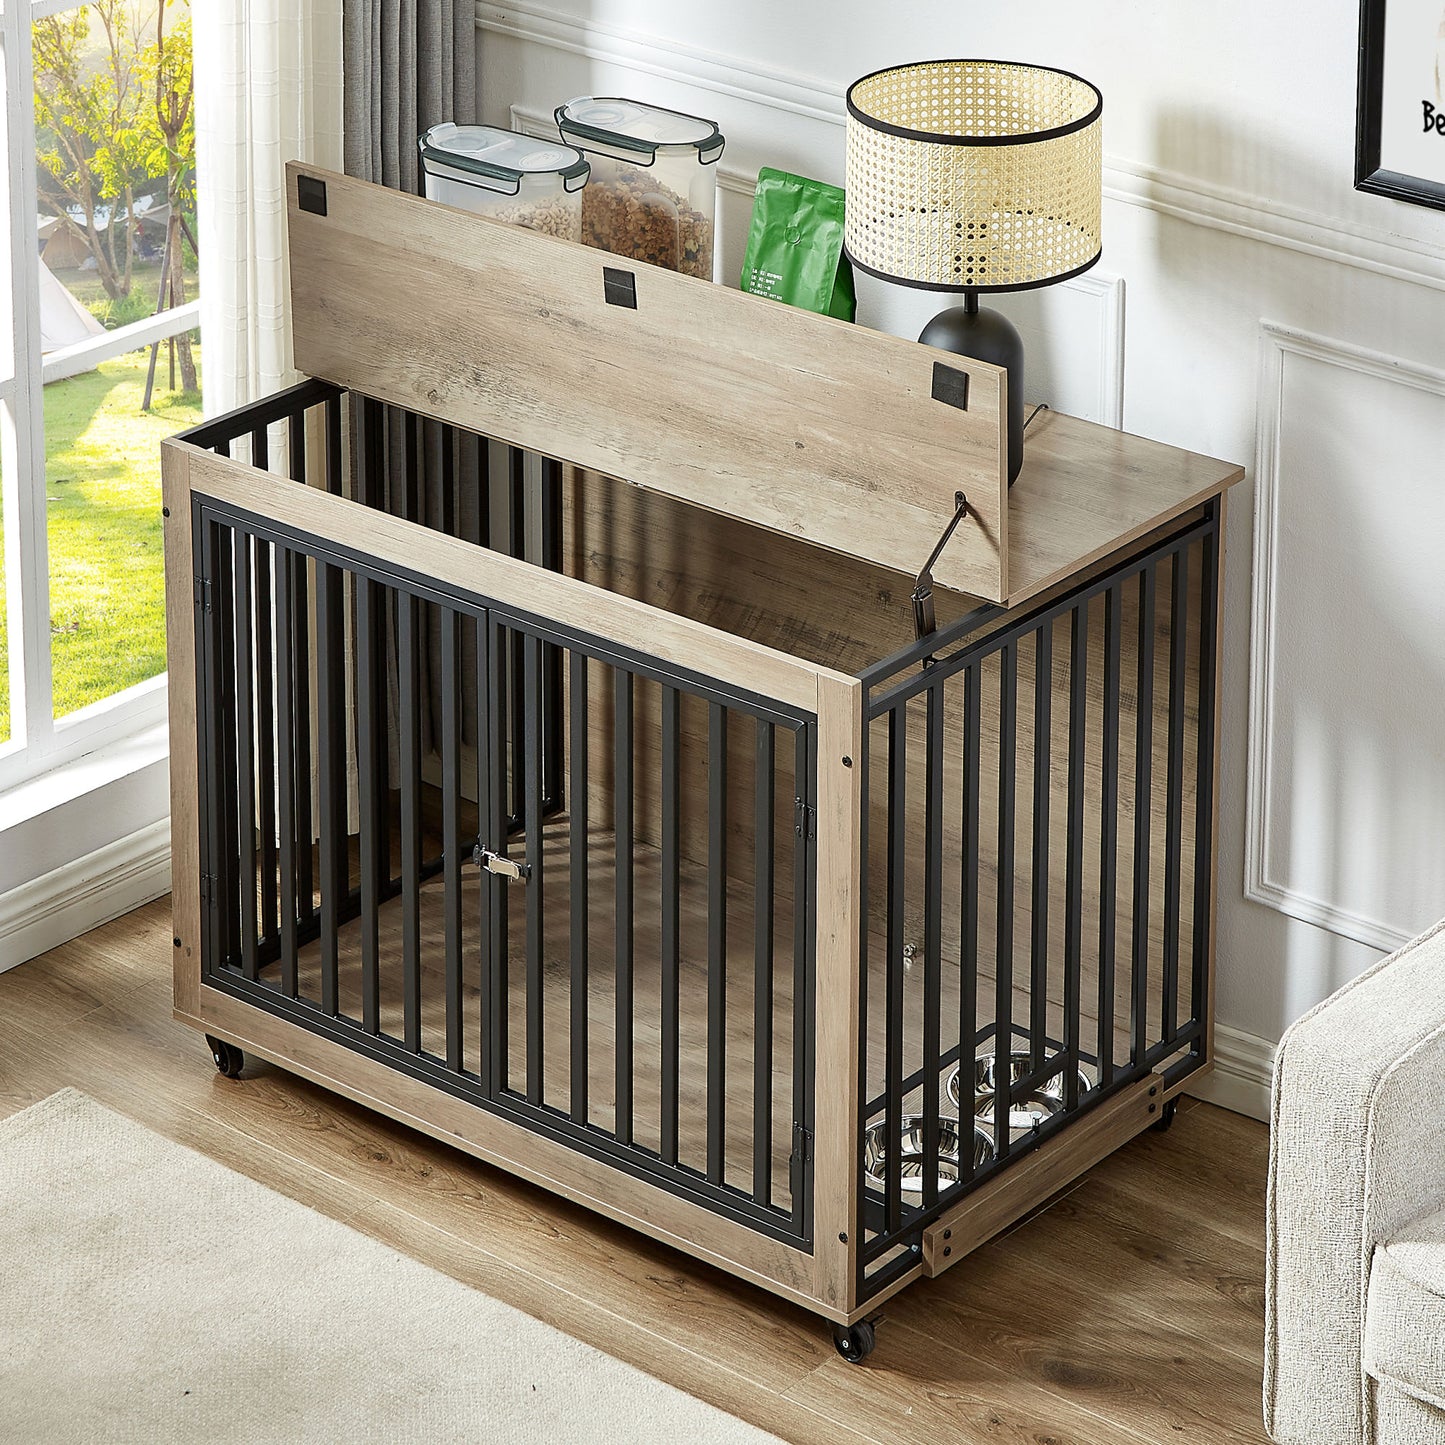 Furniture Style Dog Crate Side Table With Feeding Bowl, Wheels, Three Doors, Flip-Up Top Opening. Indoor, Grey, 43.7"W x 30"D x 33.7"H